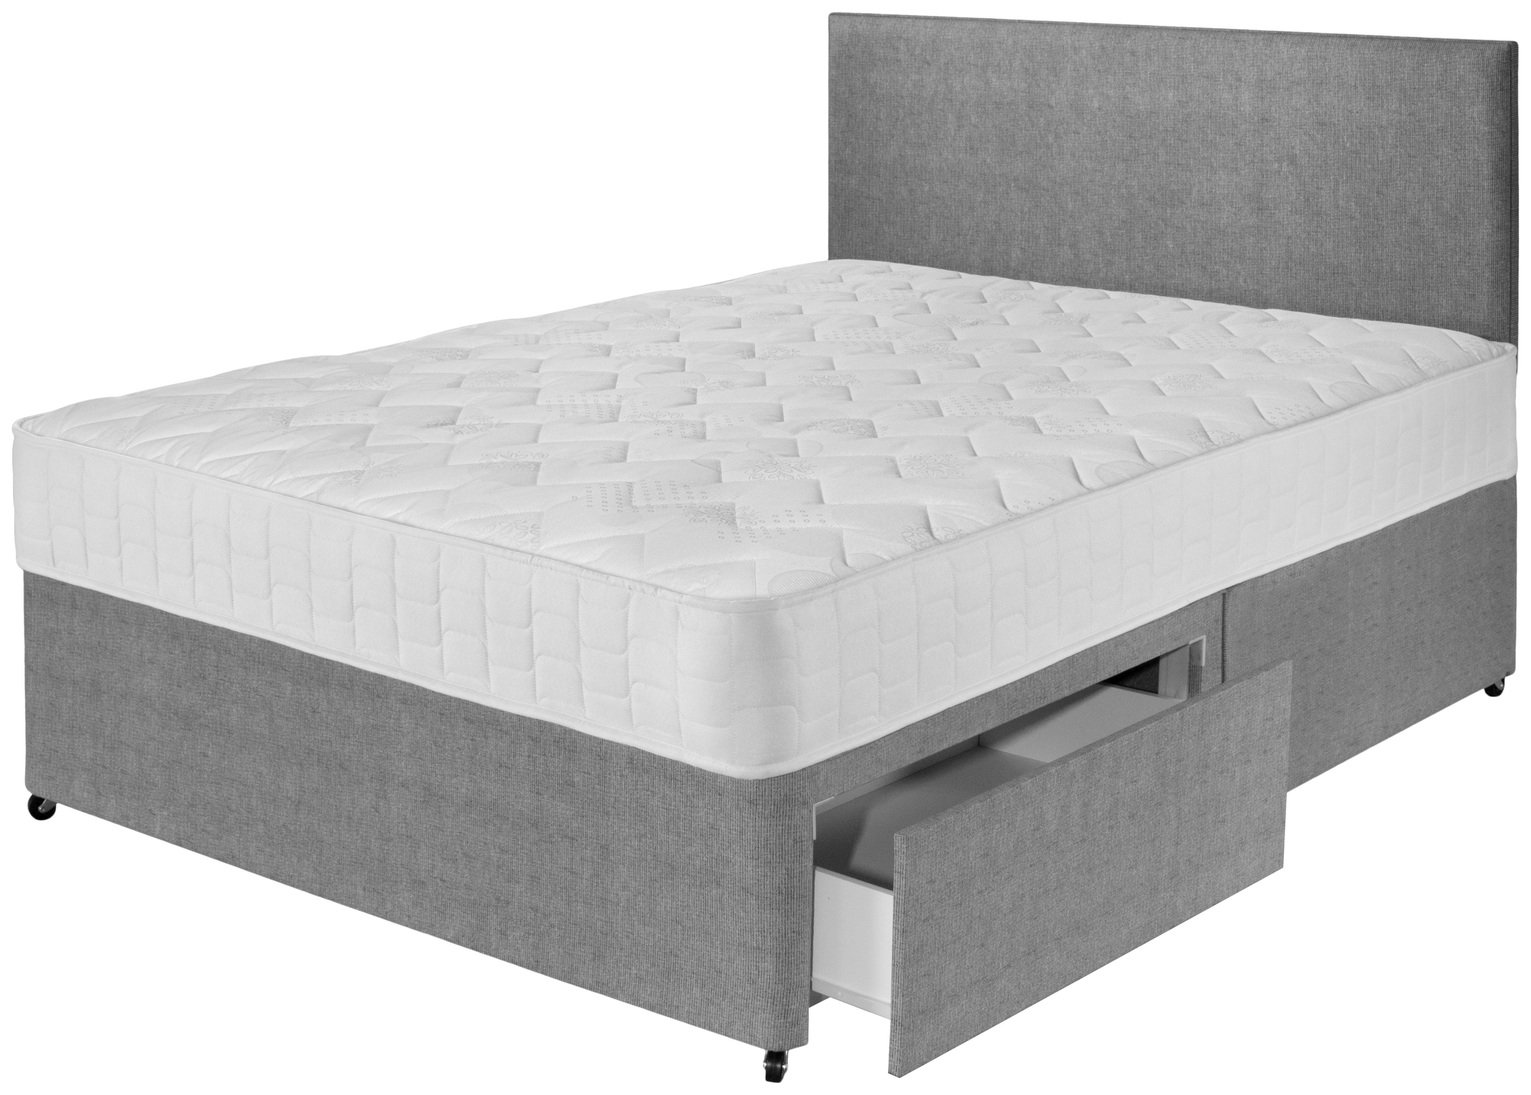 Airsprung Elmdon Deep Ortho Double 2 Drw Divan Bed. Review